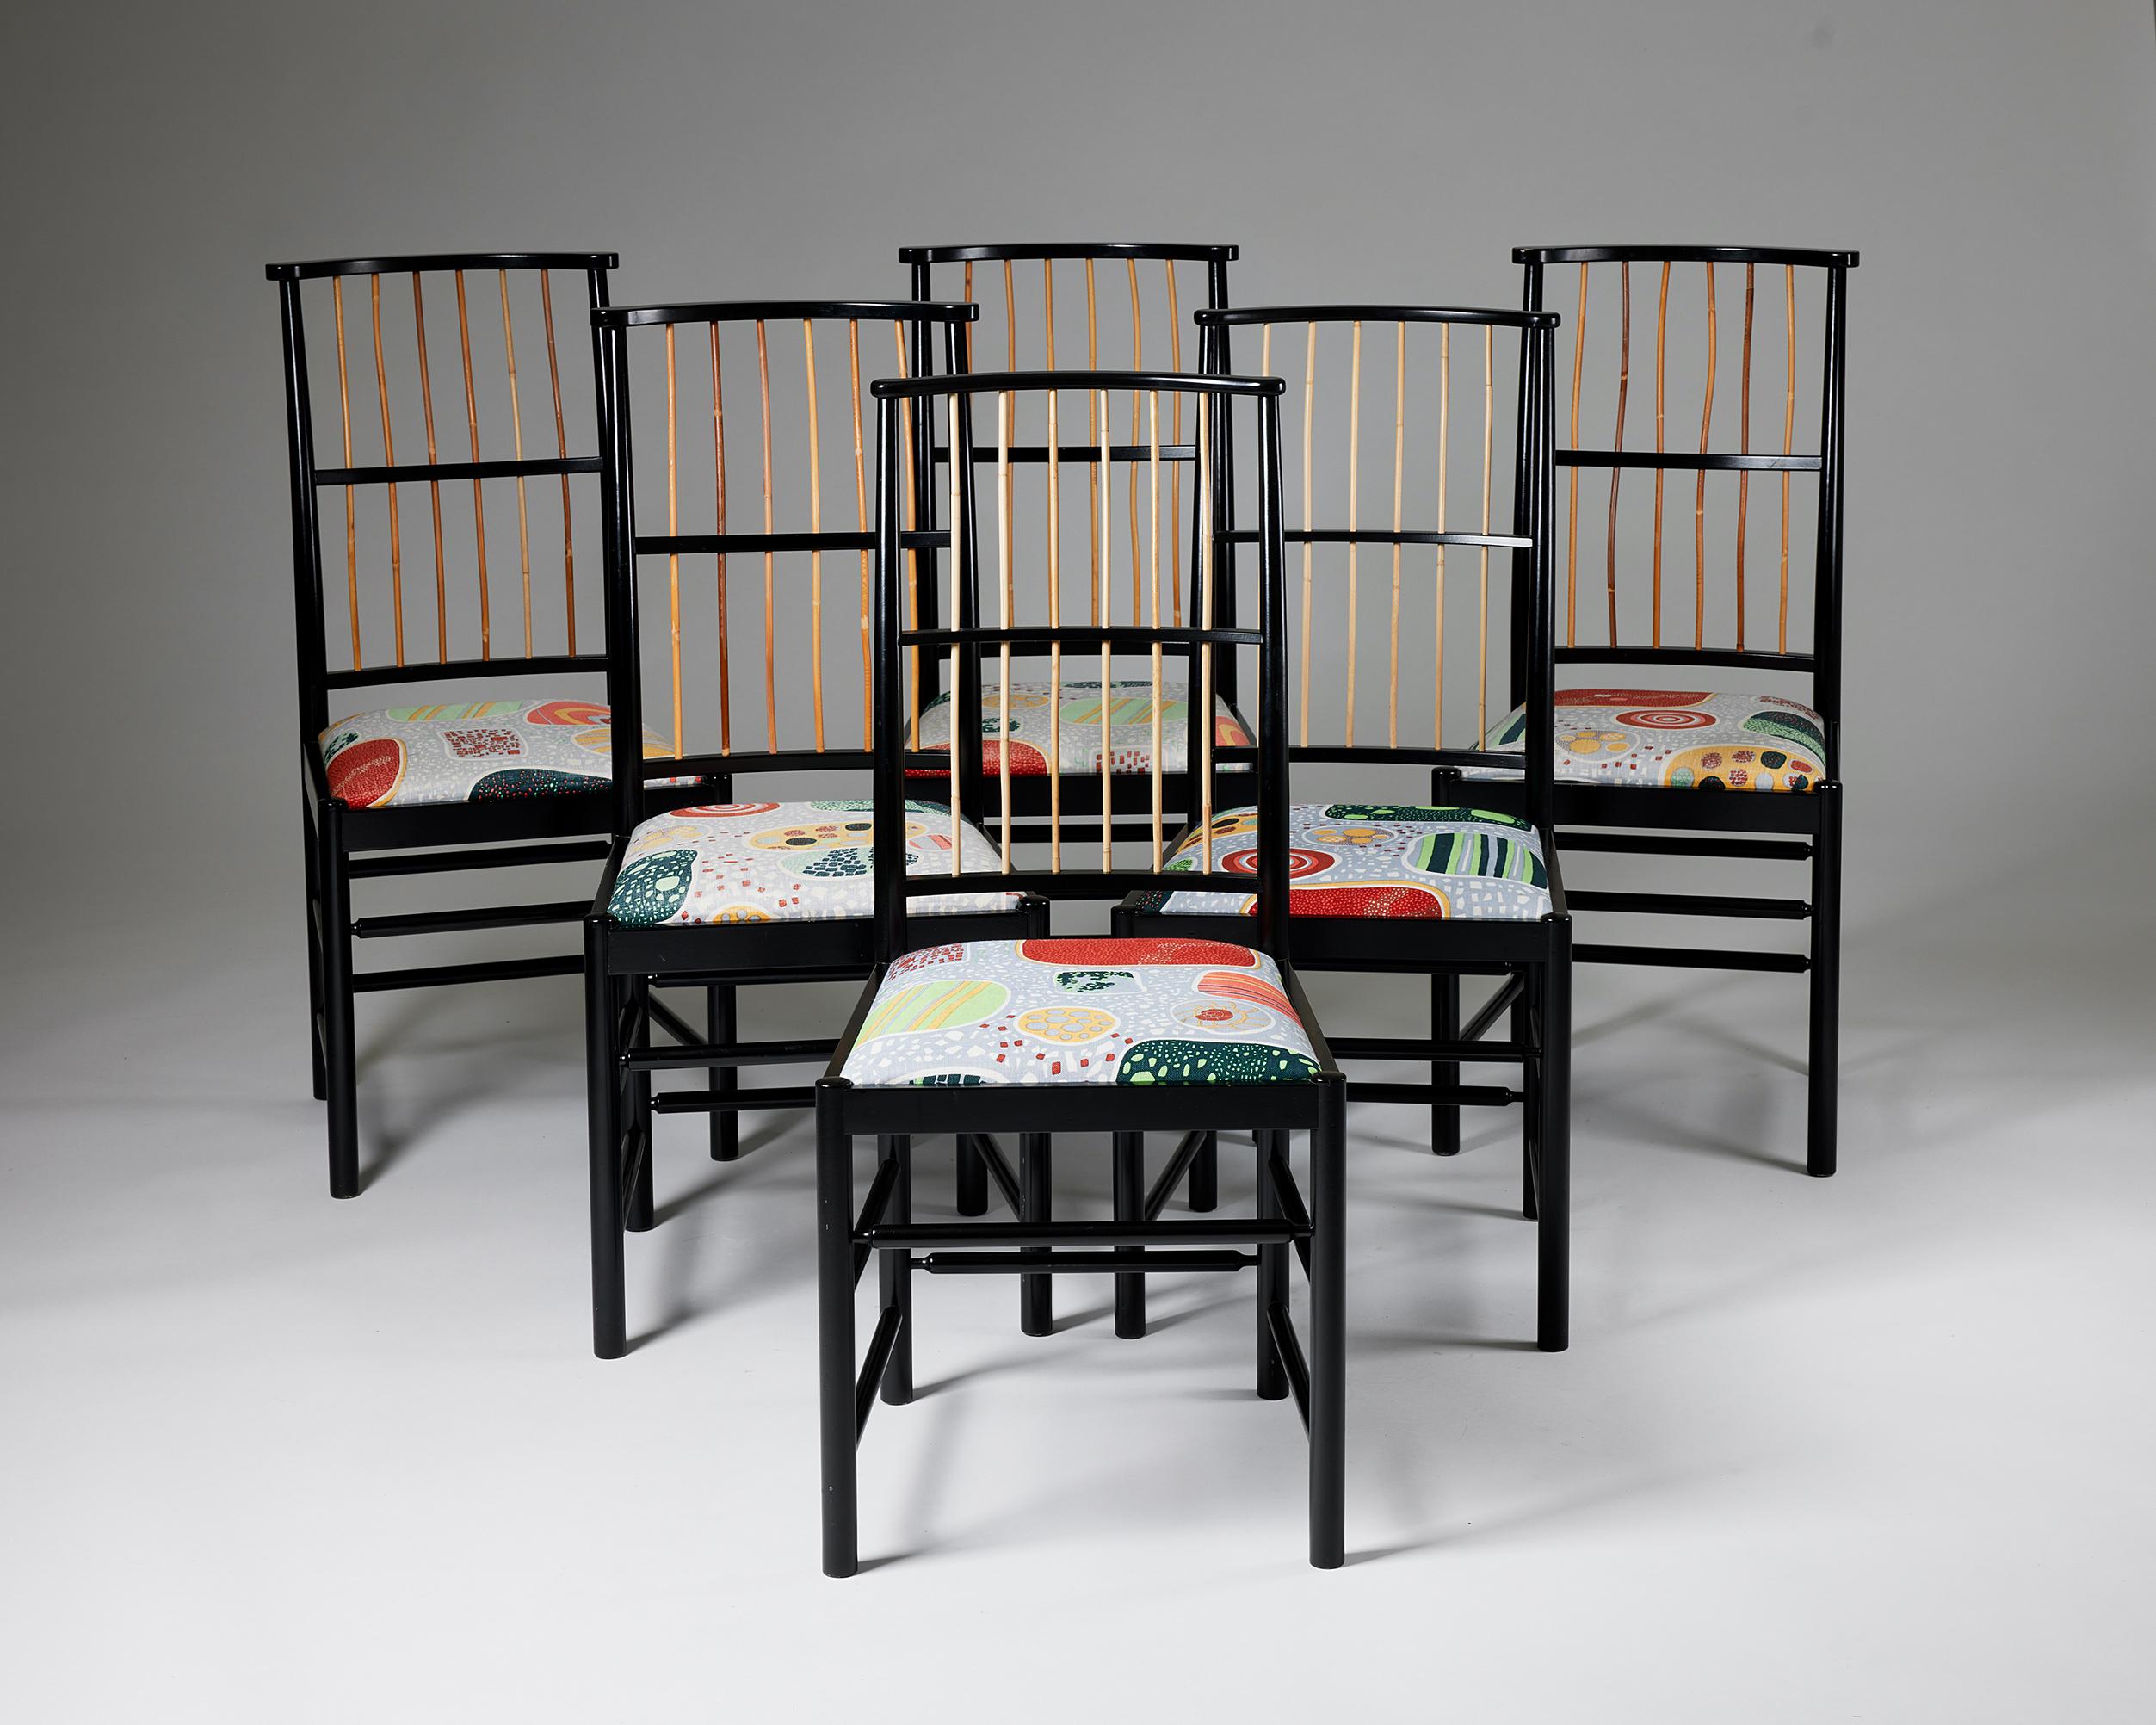 Set of six chairs model 2025 designed by Josef Frank for Svenskt Tenn,
Sweden, 1950s.

Lacquered wood frame and a fabric upholstered seat.

Marked.

Josef Frank designed this chair in 1925 for his company Haus und Garten in Vienna.

Measures: 
H: 96